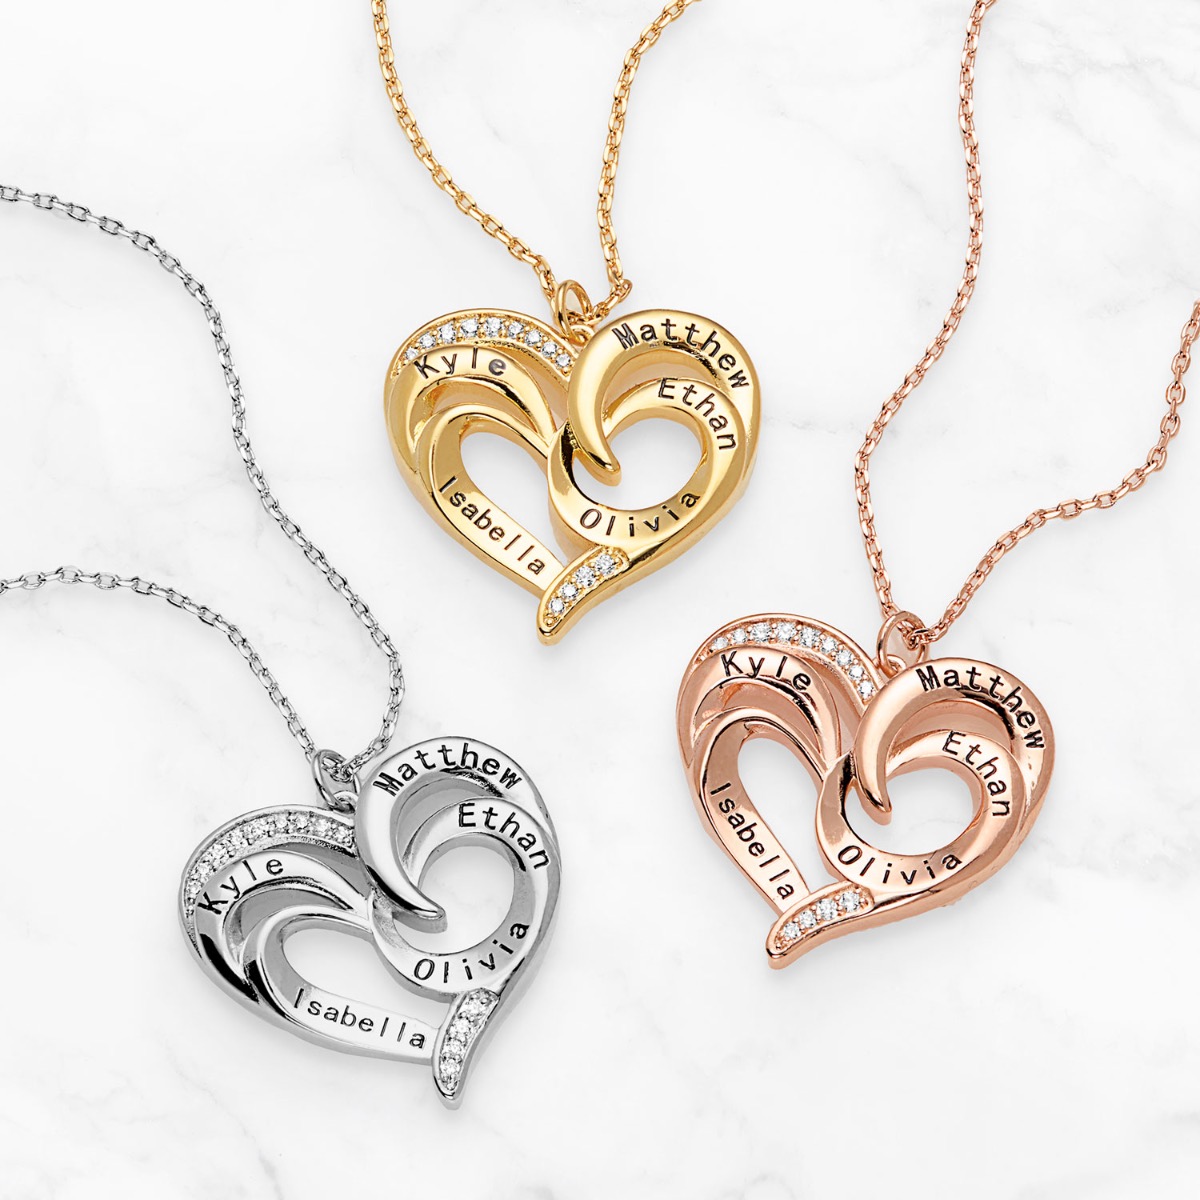 Engraved Swirl Heart with CZ Necklace